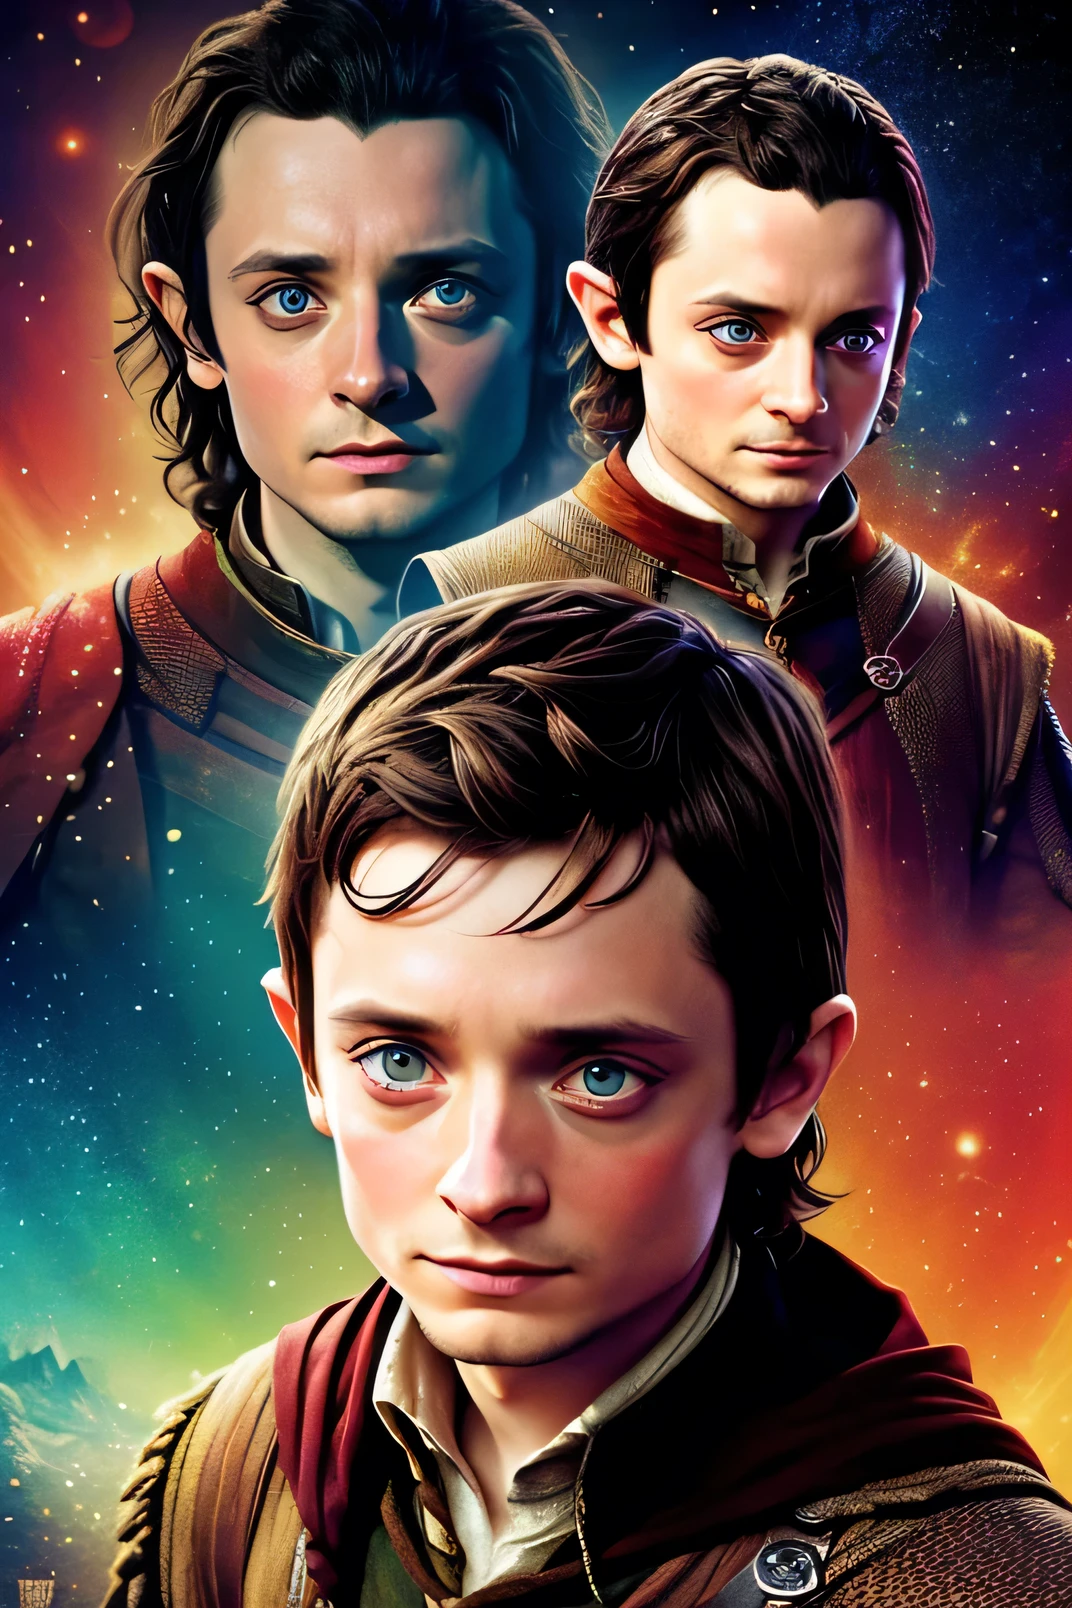 Actor Elijah Wood from The Lord of the Rings, detailed representation of the face, detailed background, random pose, high resolution, detailed random colorful background, light background, colorful background, half body shot, random pose, half body, detailed eyes, detailed face, high resolution